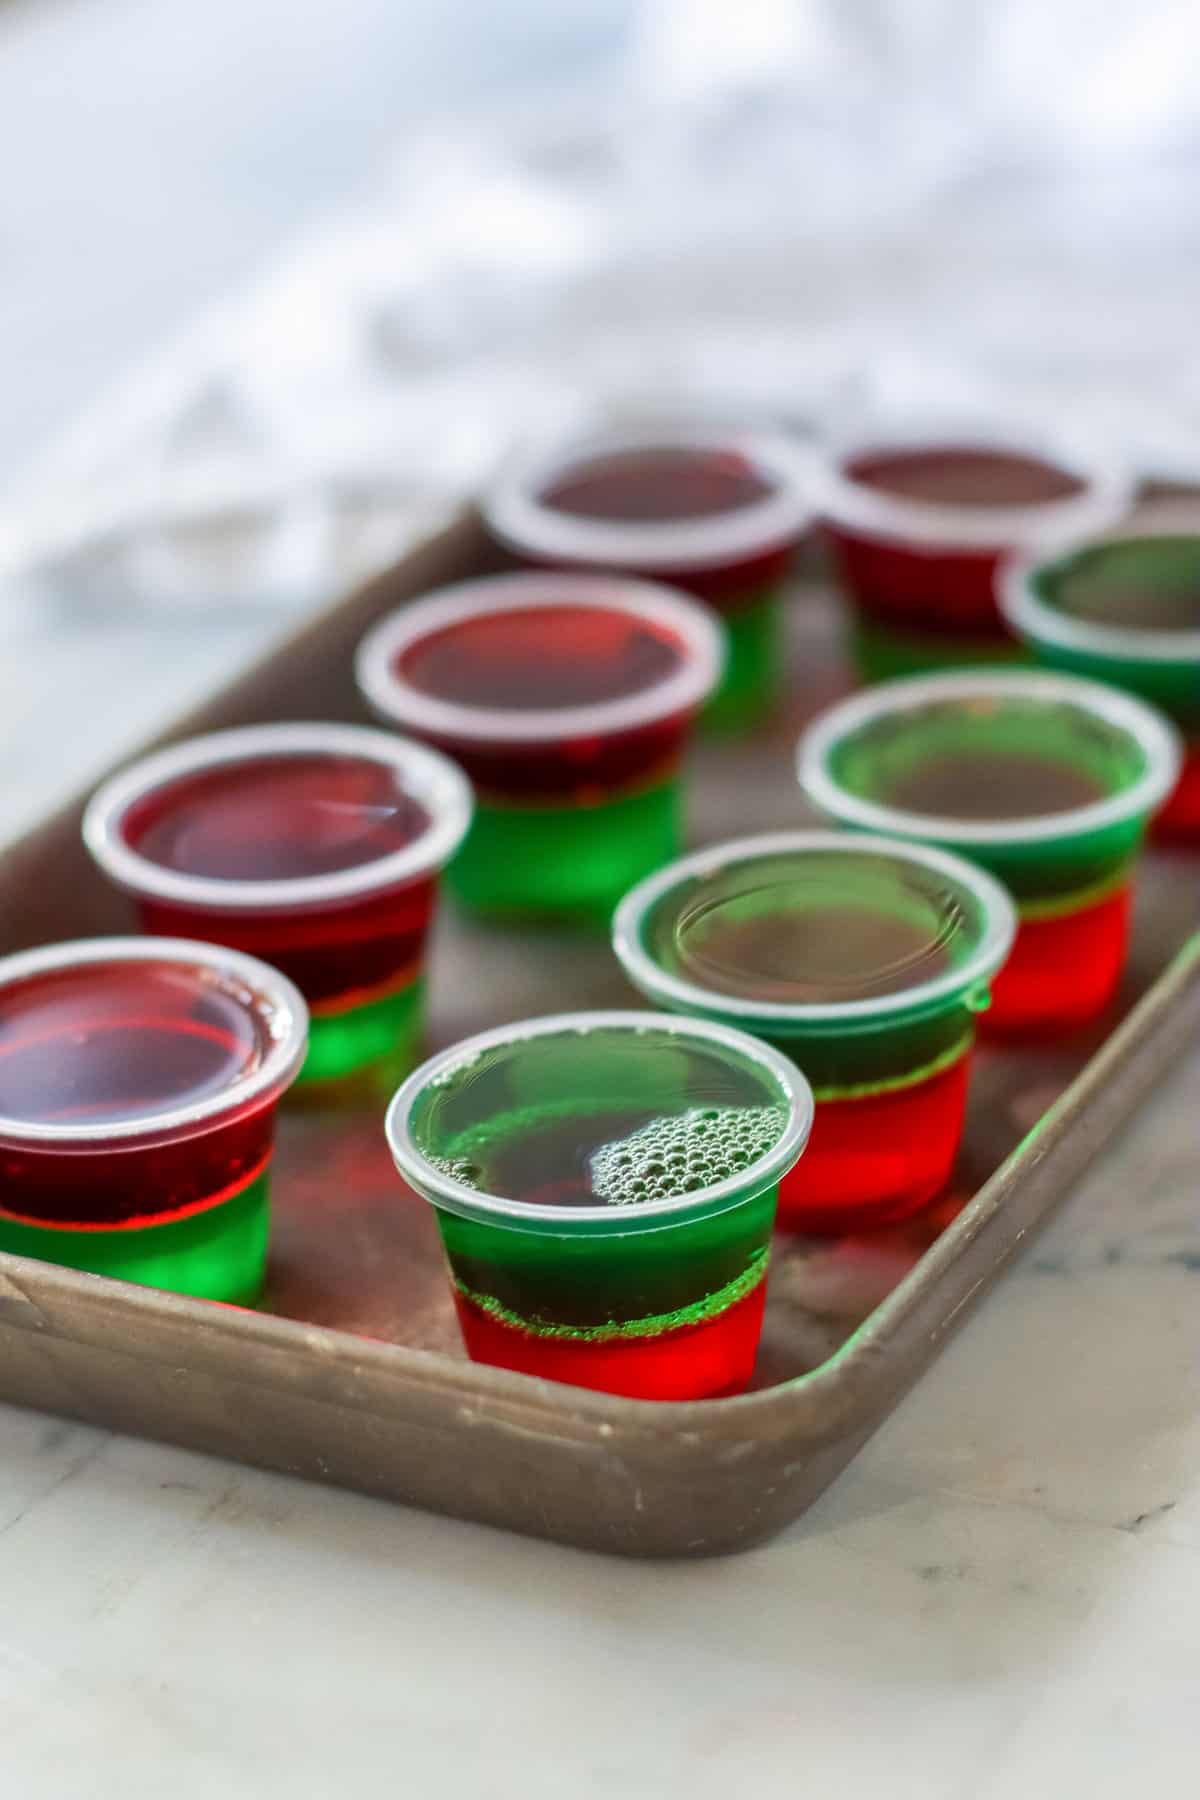 Layered red and green shots on metal tray.